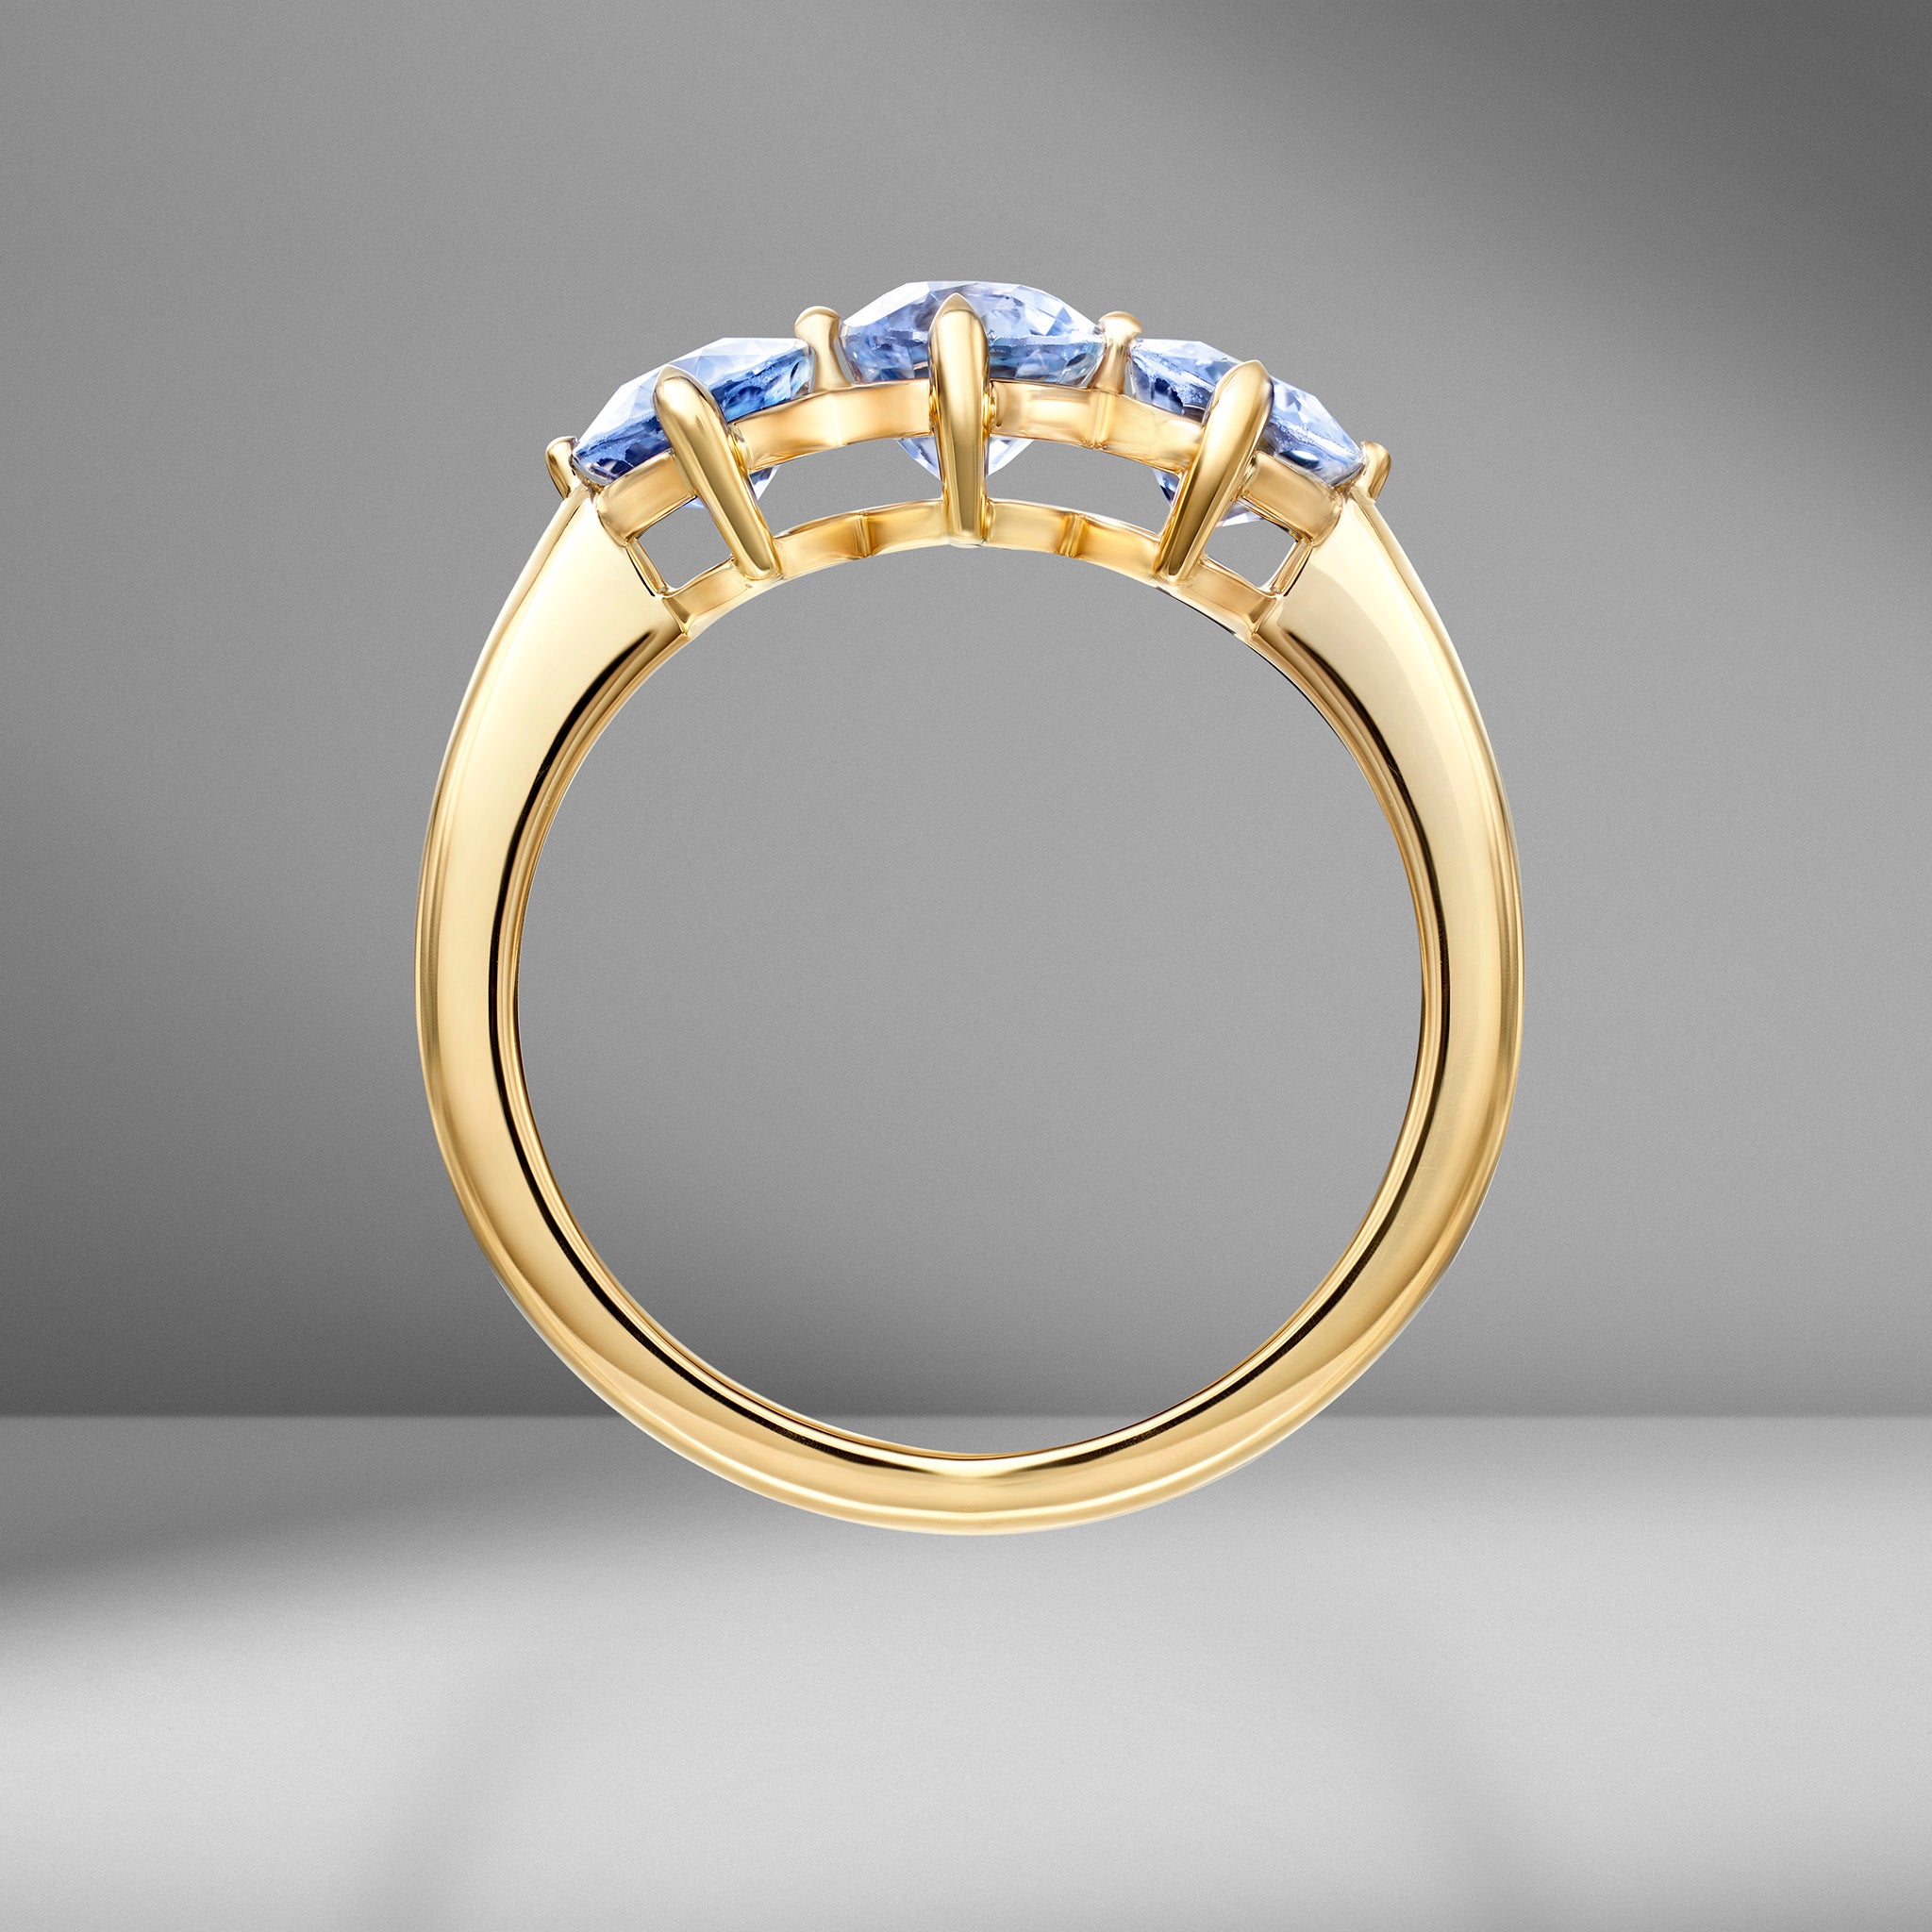 The Lacie Ring